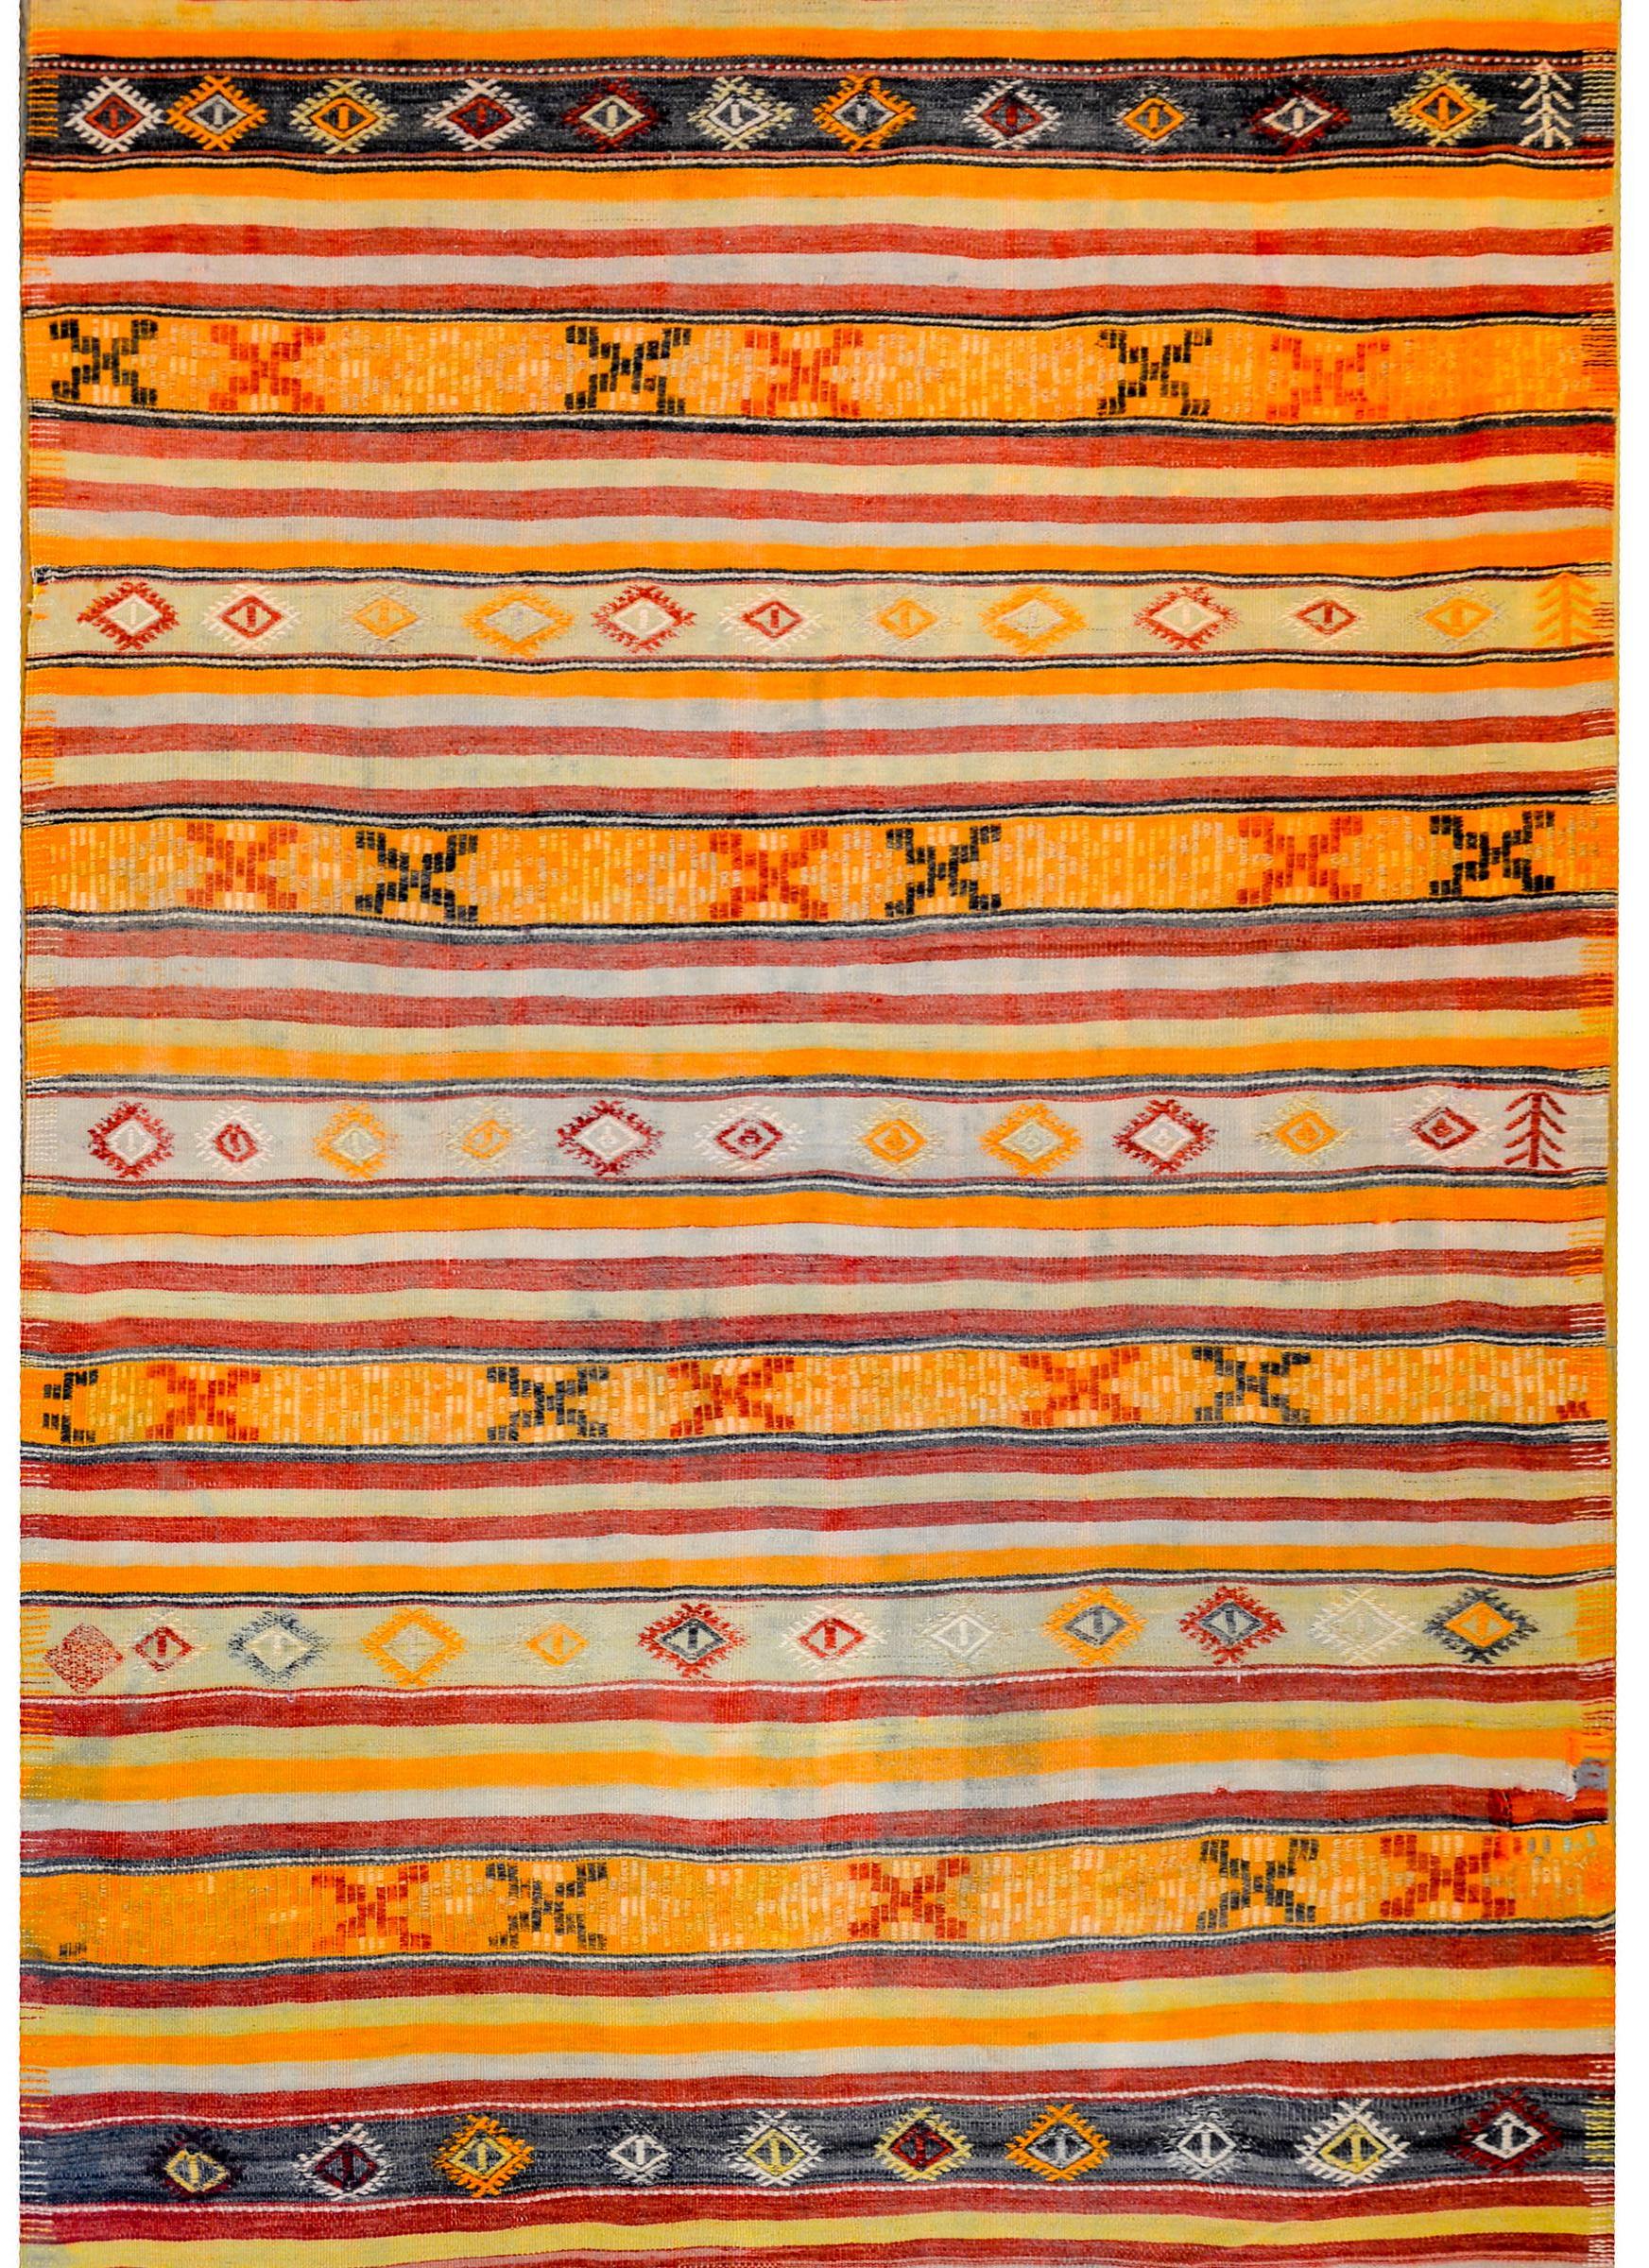 A beautiful mid-20th century Turkish Anatolian Kilim rug with myriad multicolored and geometric patterned stripes woven in black, crimson, orange, cream, and green vegetable dyed wool.